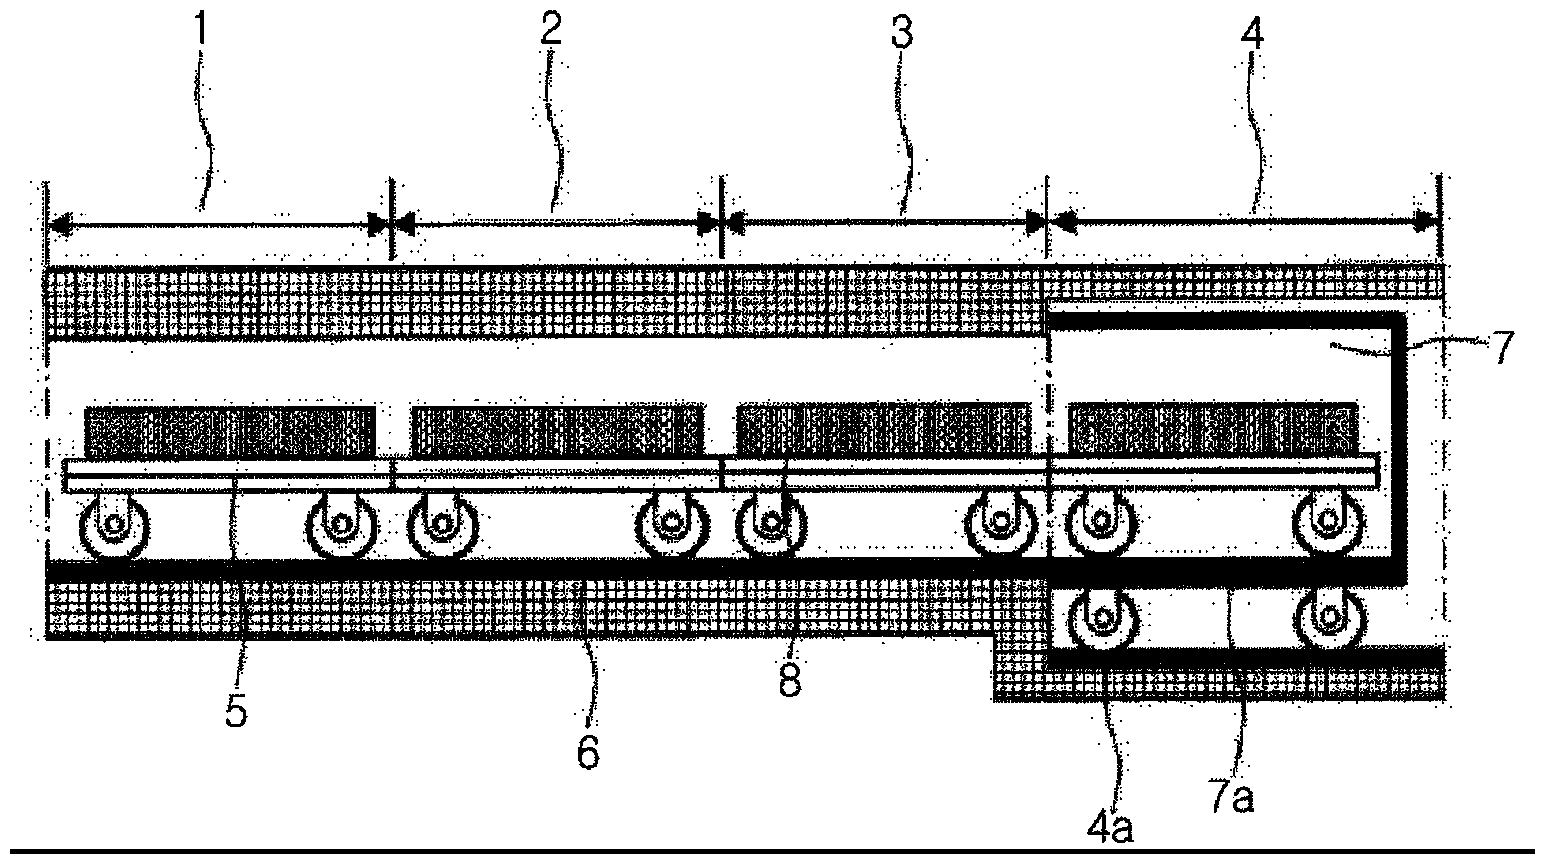 Apparatus and method for manufacturing traditional carbonized tiles